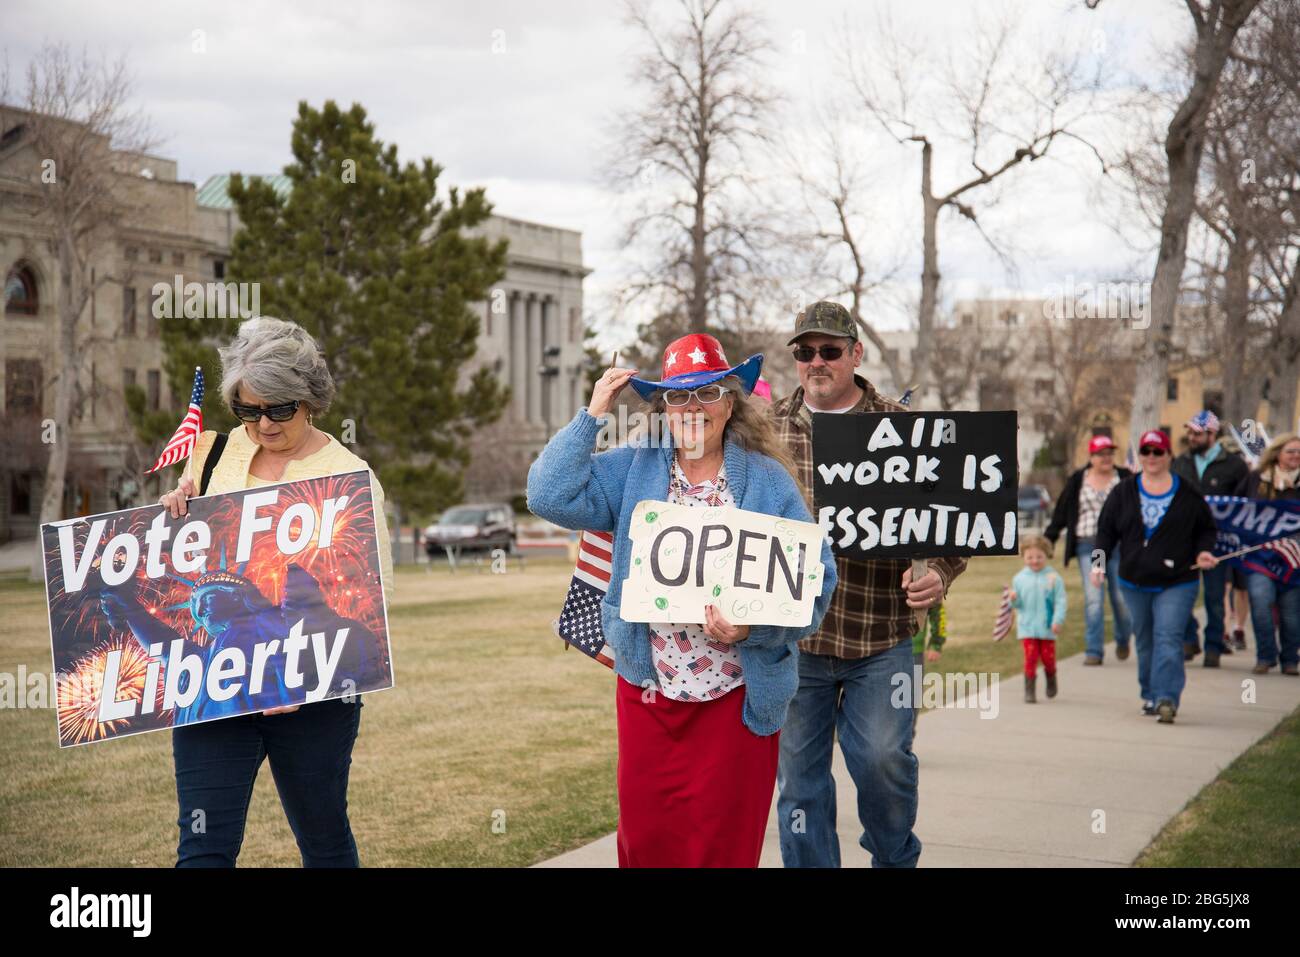 Helena, Montana - April 19, 2020: A woman wear an red white blue American flag costume at a protest to open the government shutdown. A man and women h Stock Photo